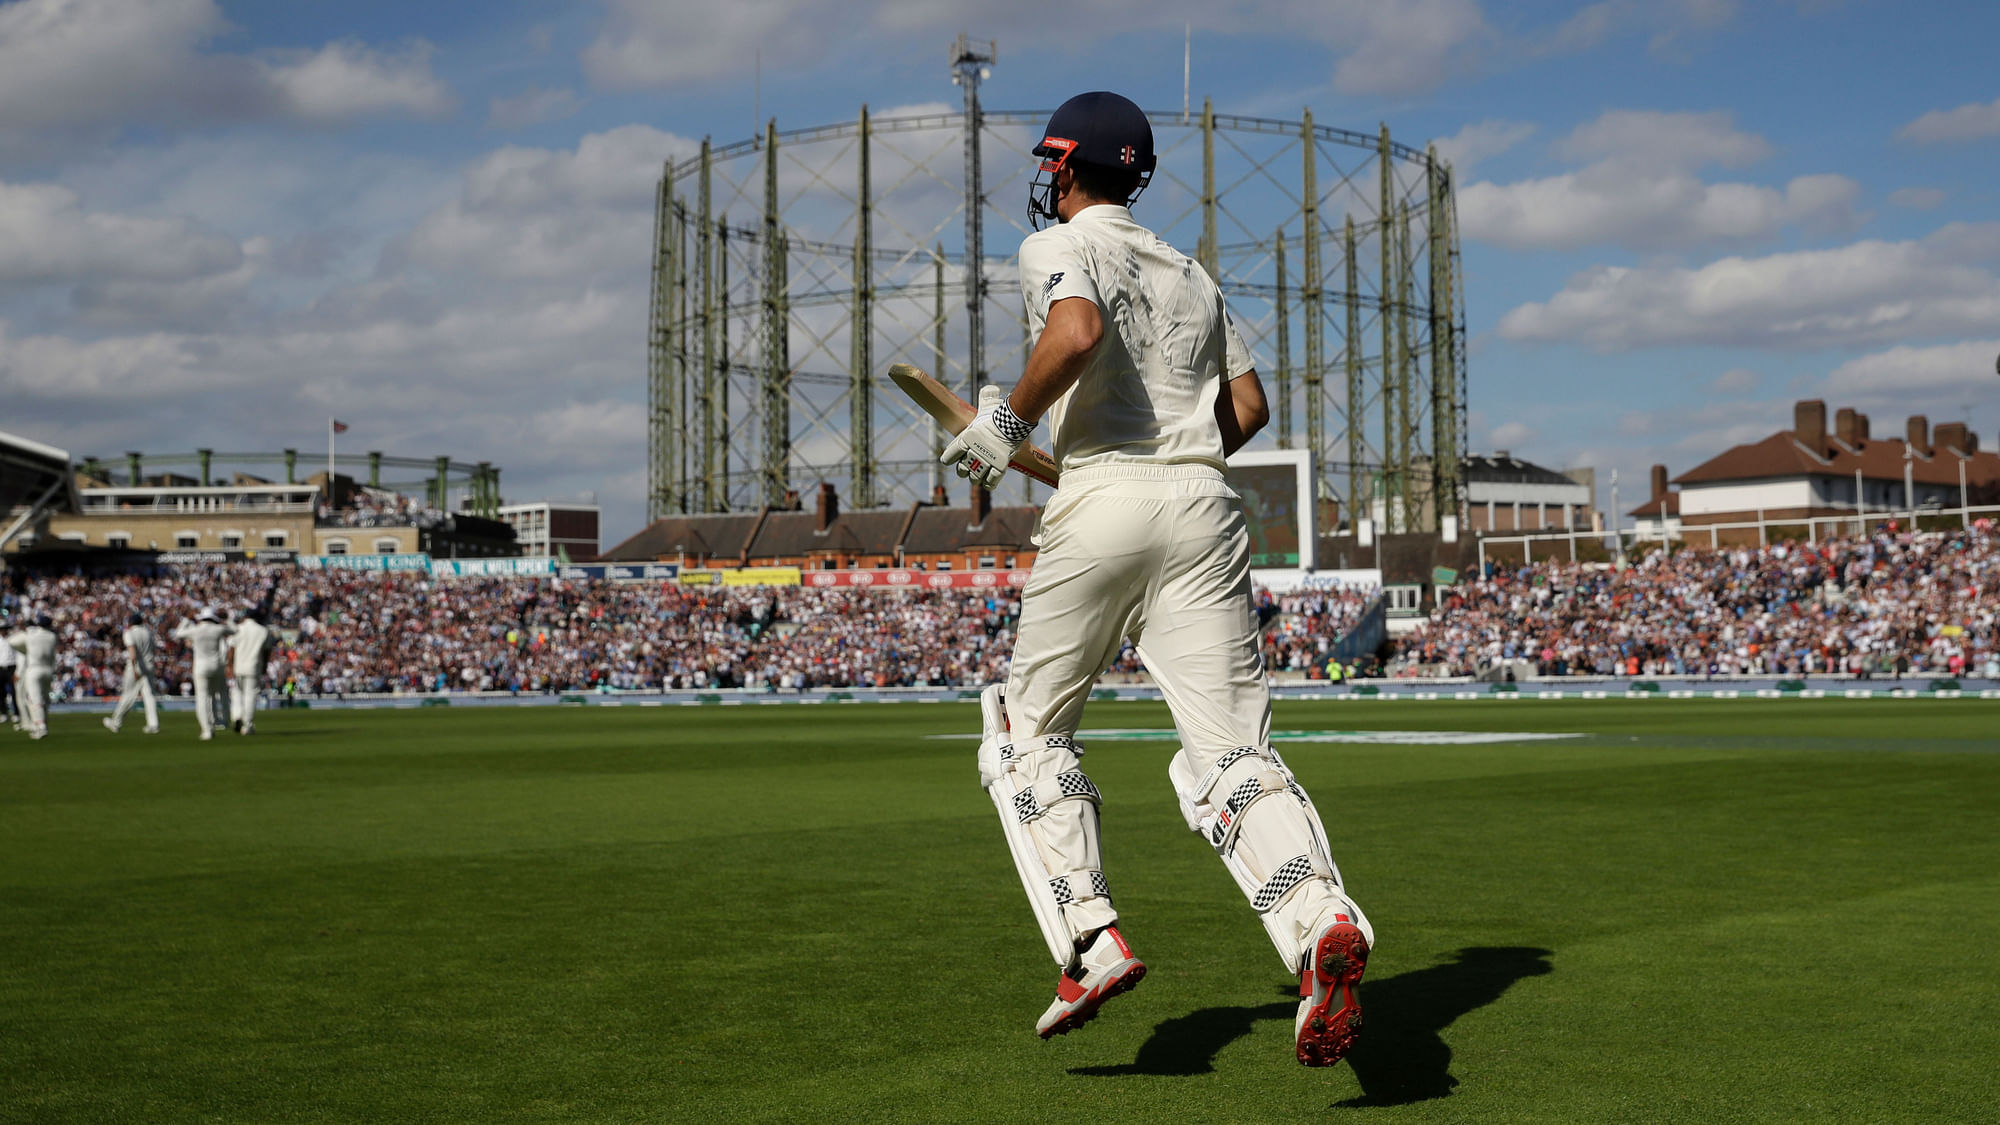 England’s Alastair Cook runs on to bat in his last innings before retiring from international cricket.